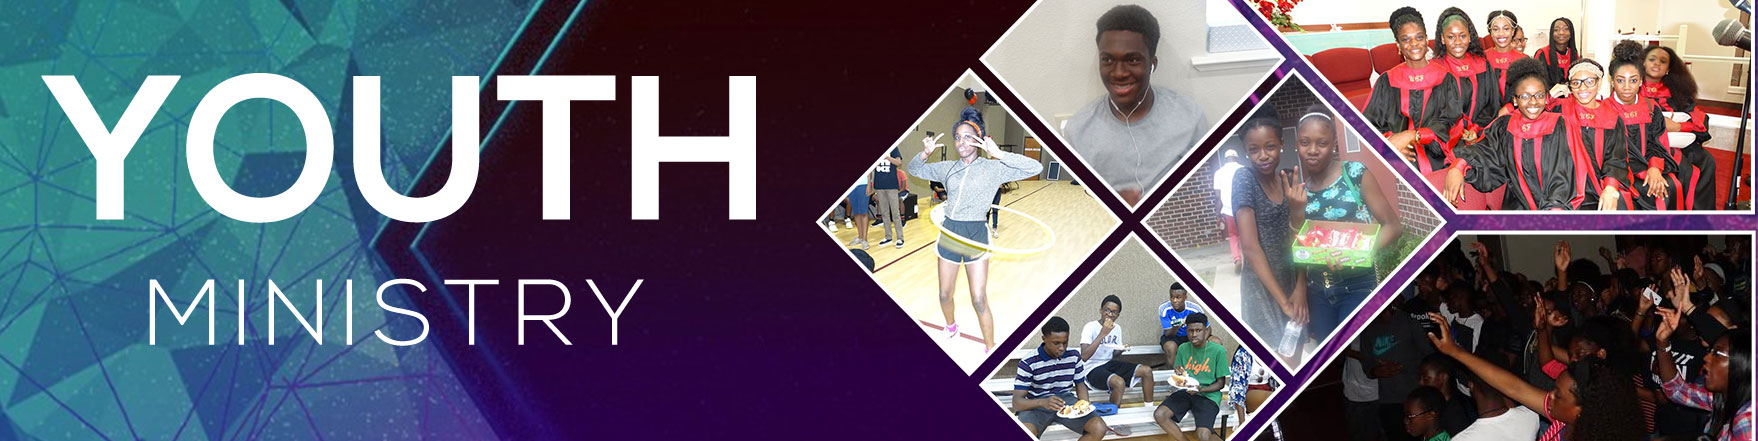 UCF-Youth-Ministry-Banner-1.jpg